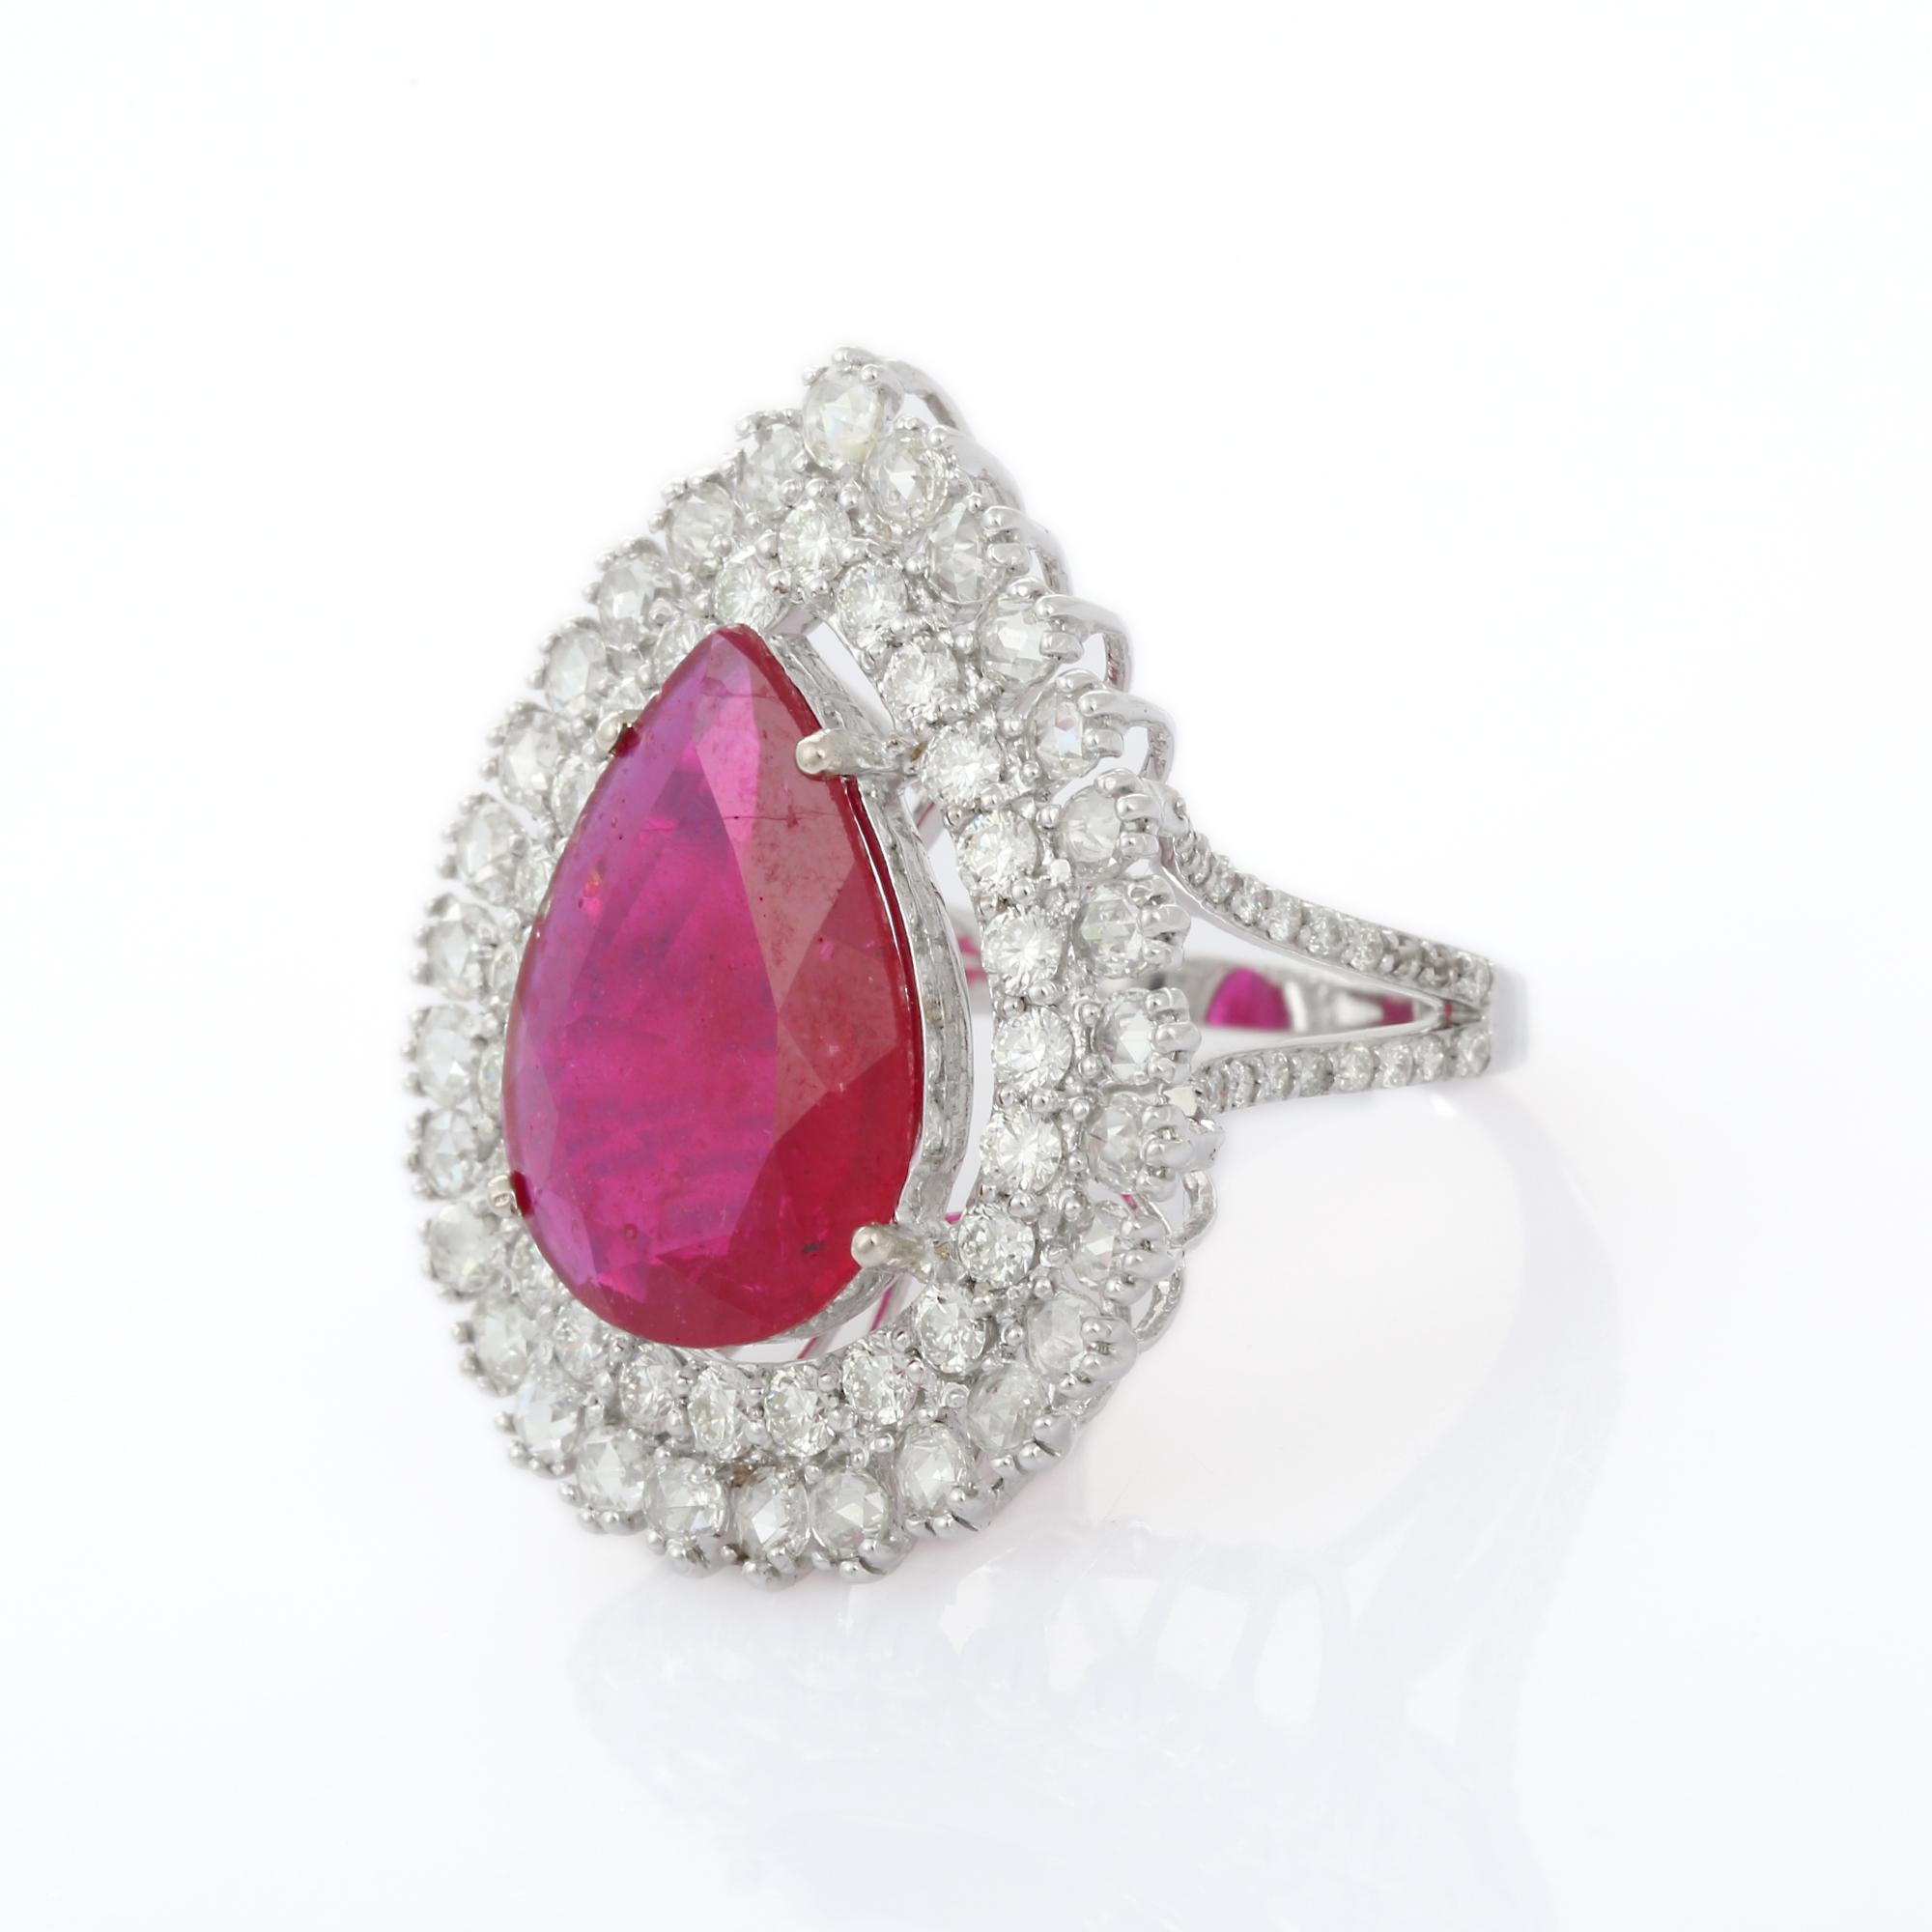 For Sale:  Vivid 9.7 Carat Ruby and Diamond Wedding Cocktail Ring in 18K Solid White Gold  3